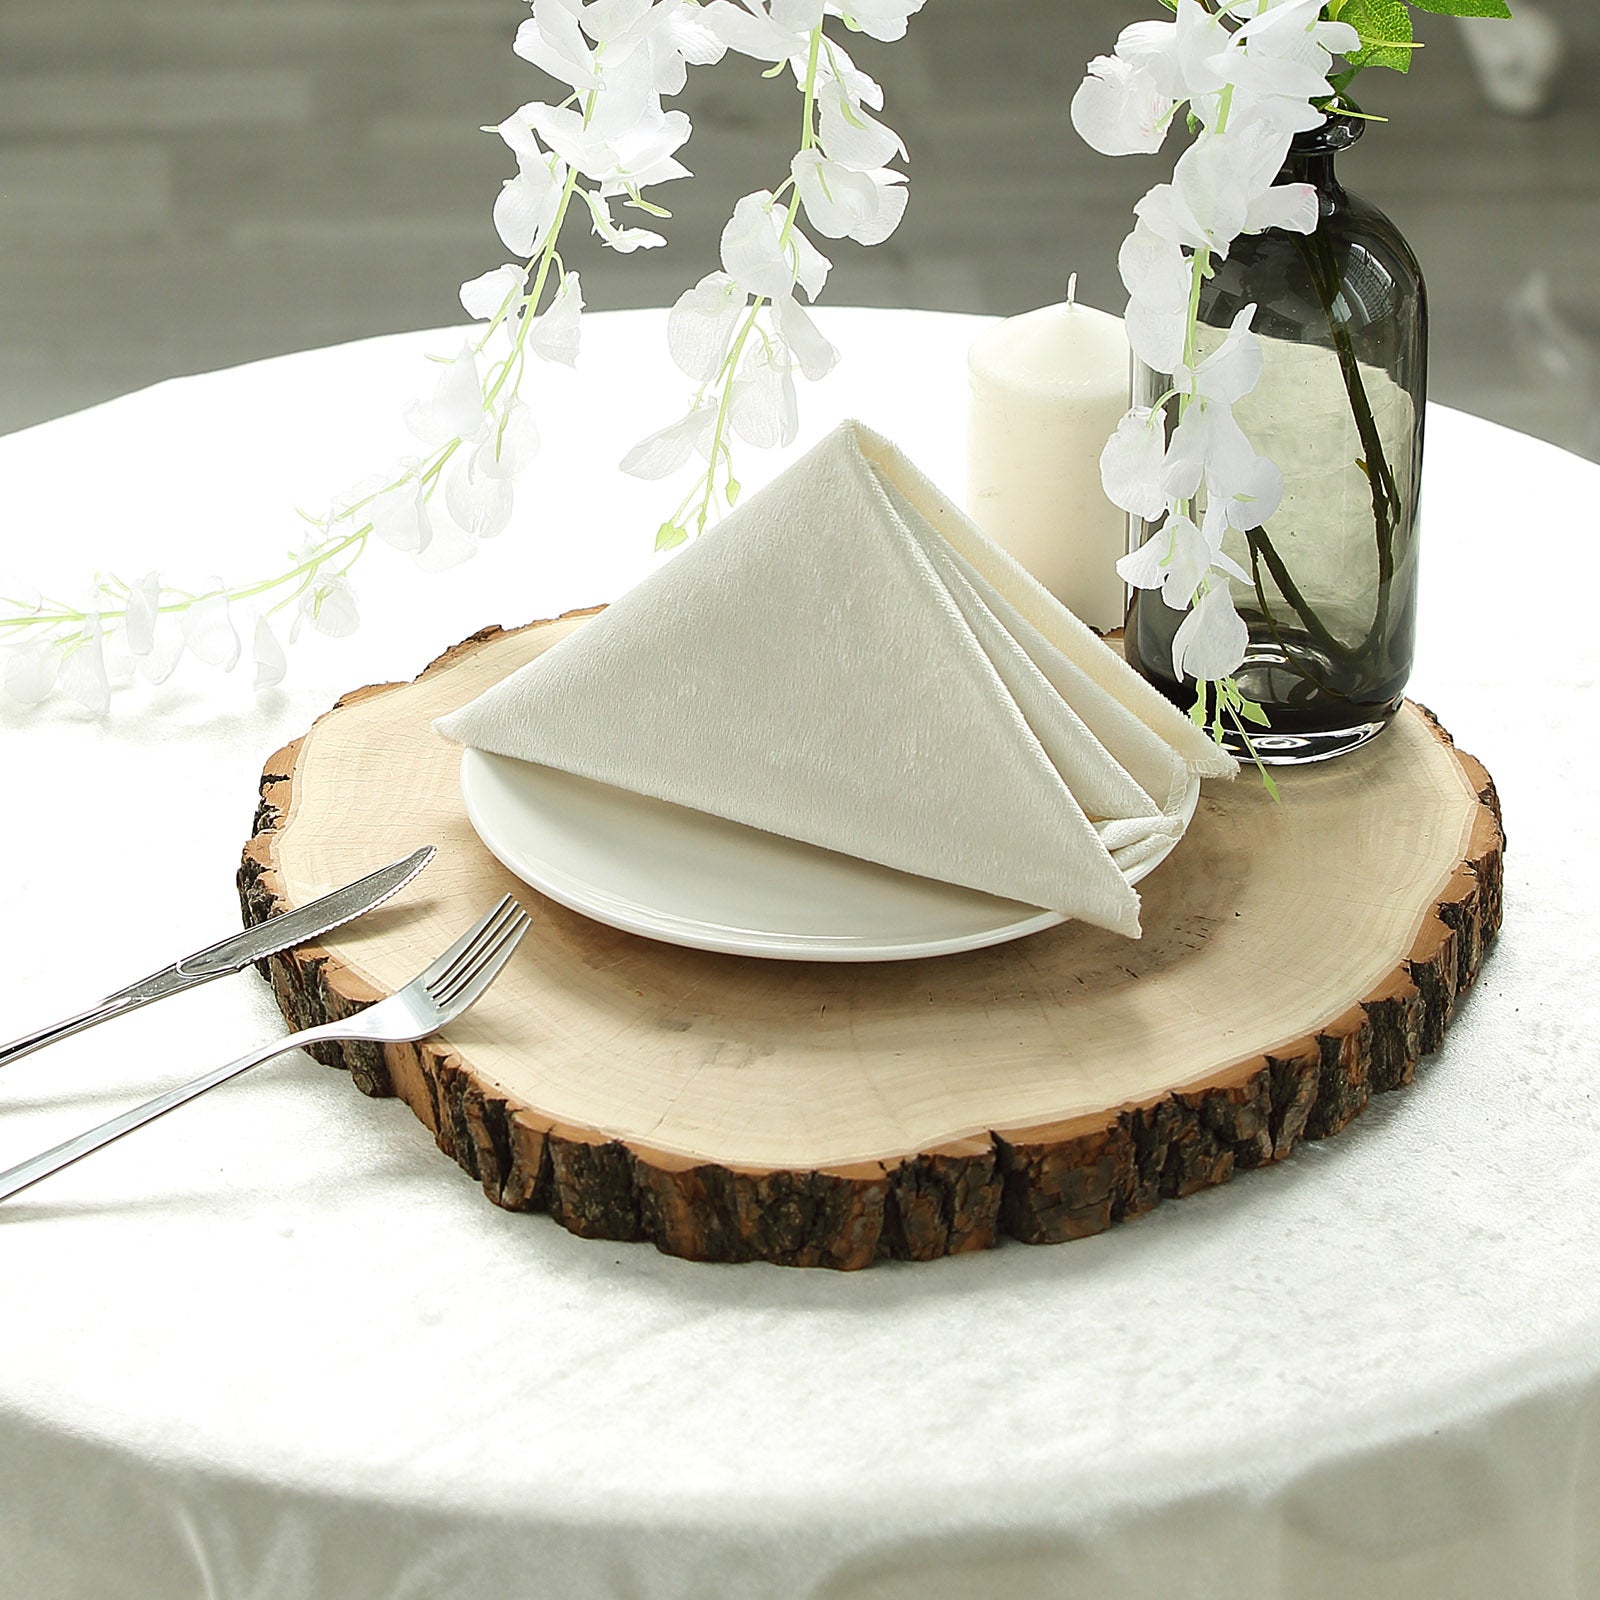 Where to Buy Wood Slices in Bulk for Wedding Centerpieces